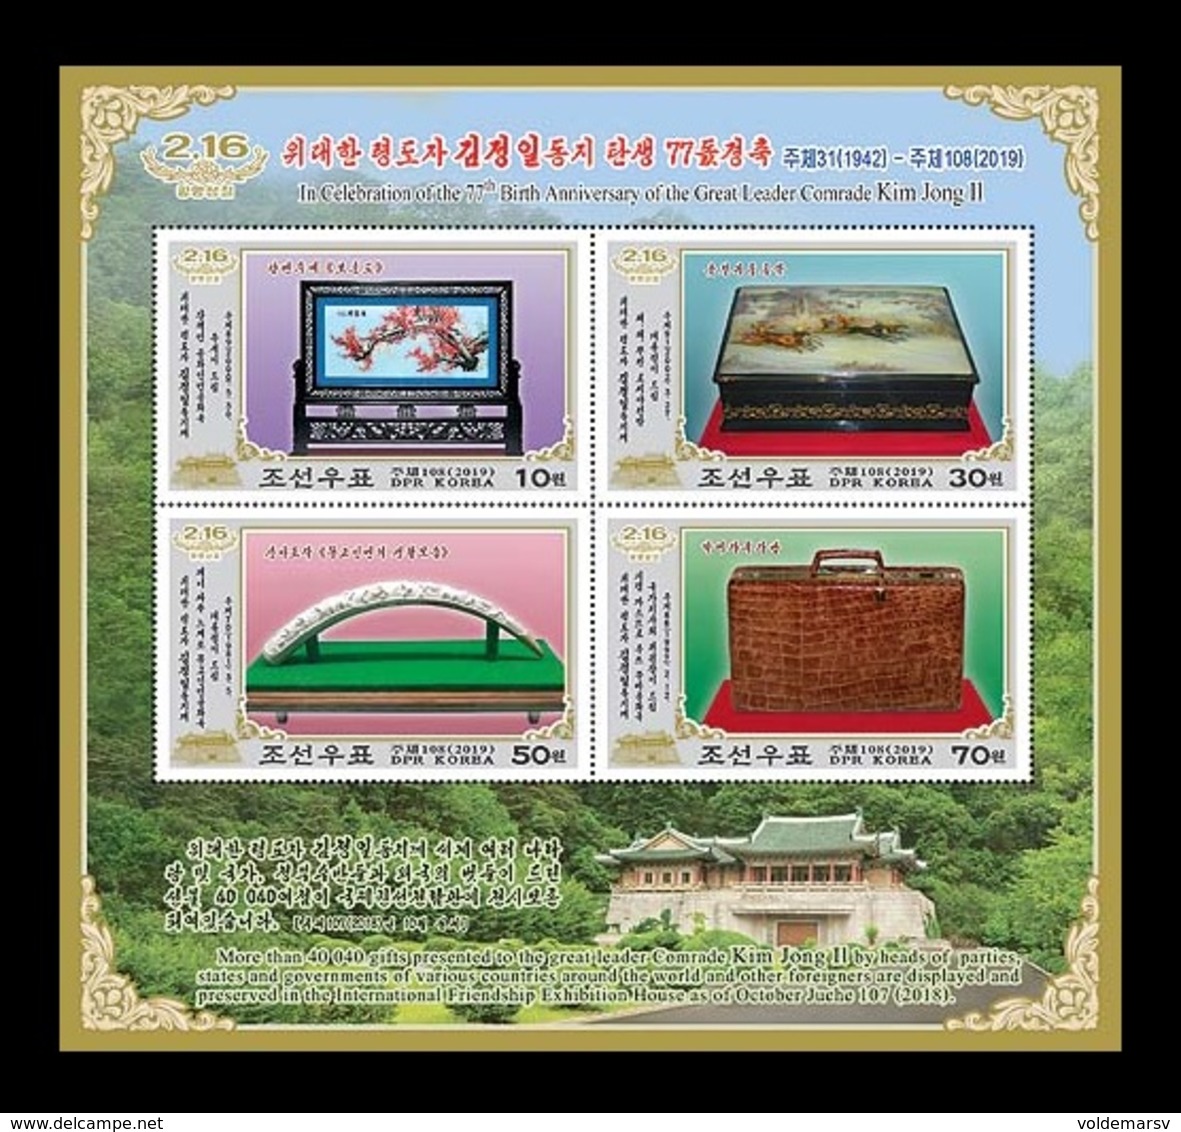 North Korea 2019 Mih. 6553/56 (Bl.997) Gifts Presented By Kim Jong Il From Friendship Exhibition House MNH ** - Corée Du Nord